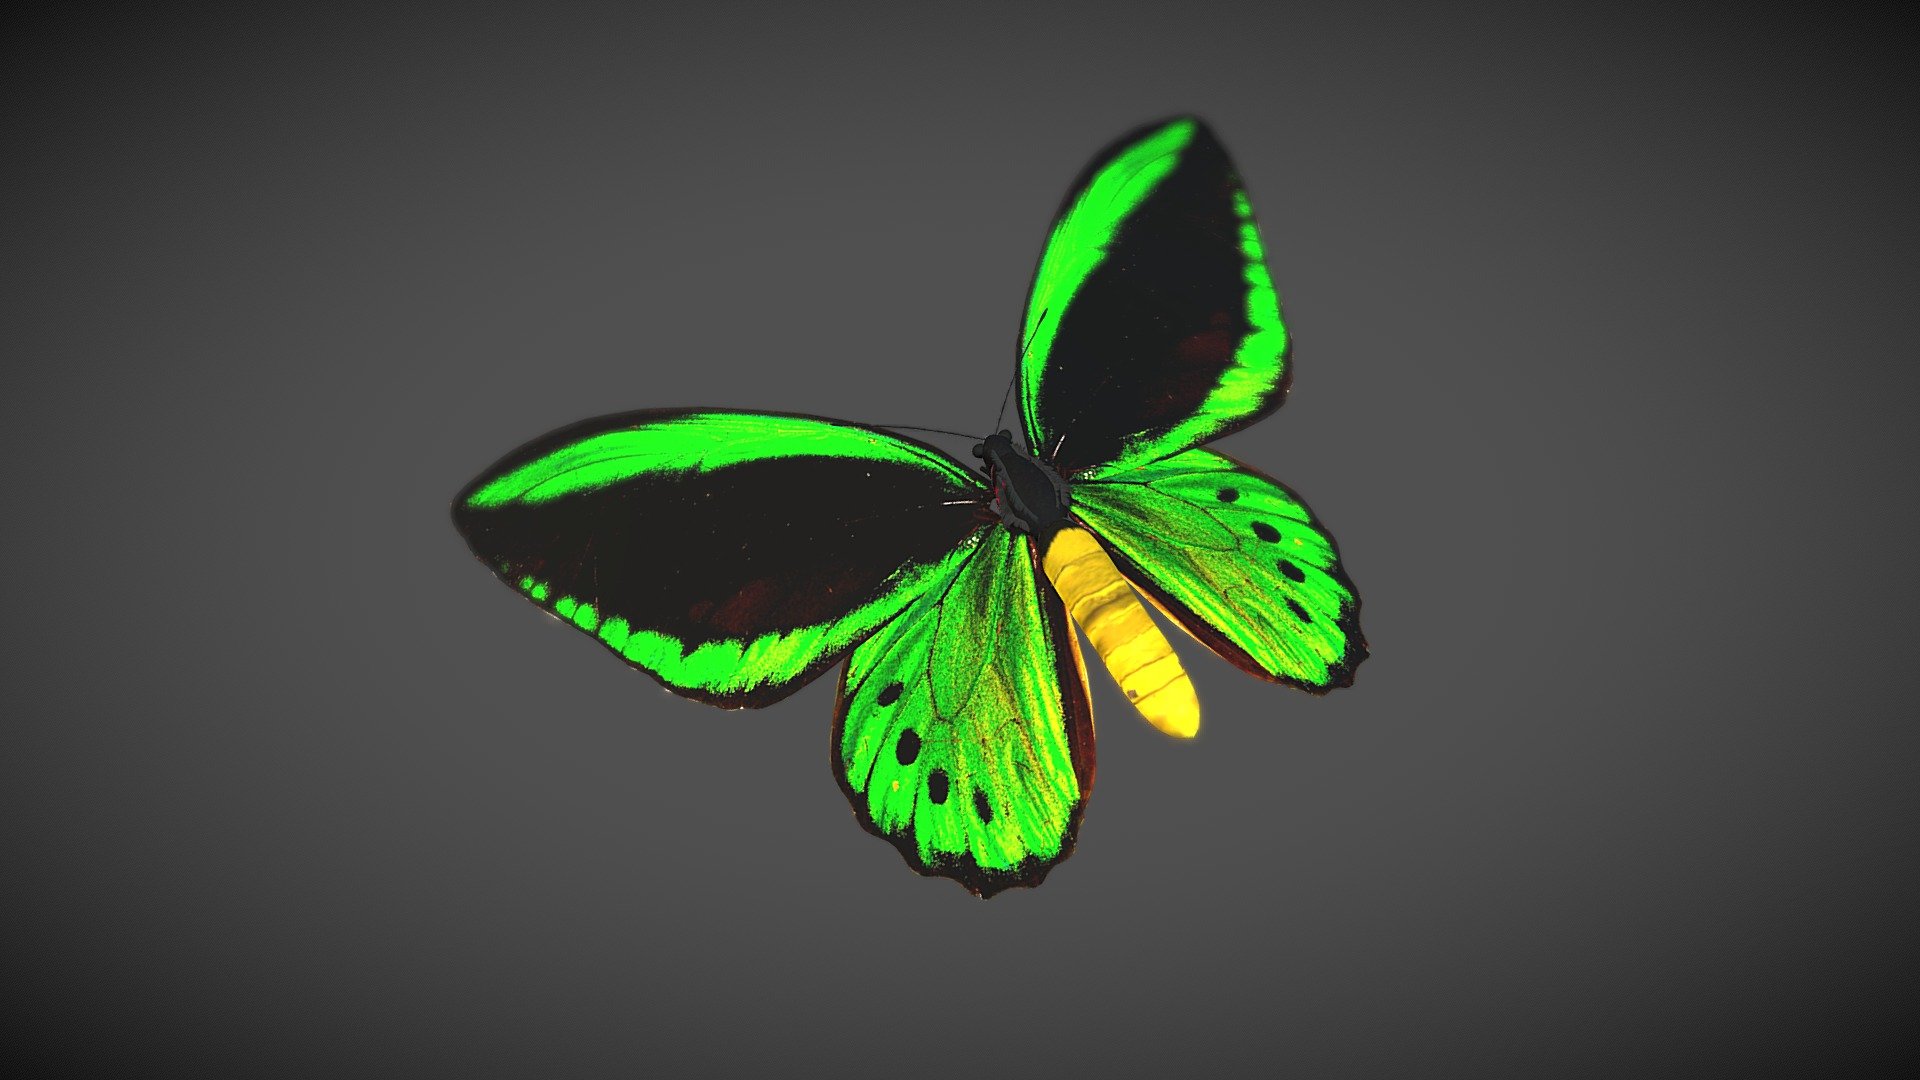 A butterfly model made for our VR project, Lepidoptera https://store.steampowered.com/app/2491860/Lepidoptera/?beta=0. It is a derivative of https://commons.wikimedia.org/wiki/File:Troides.priamus.jpg by Sarefo, CC BY-SA 3.0 http://creativecommons.org/licenses/by-sa/3.0/, via Wikimedia Commons 3d model